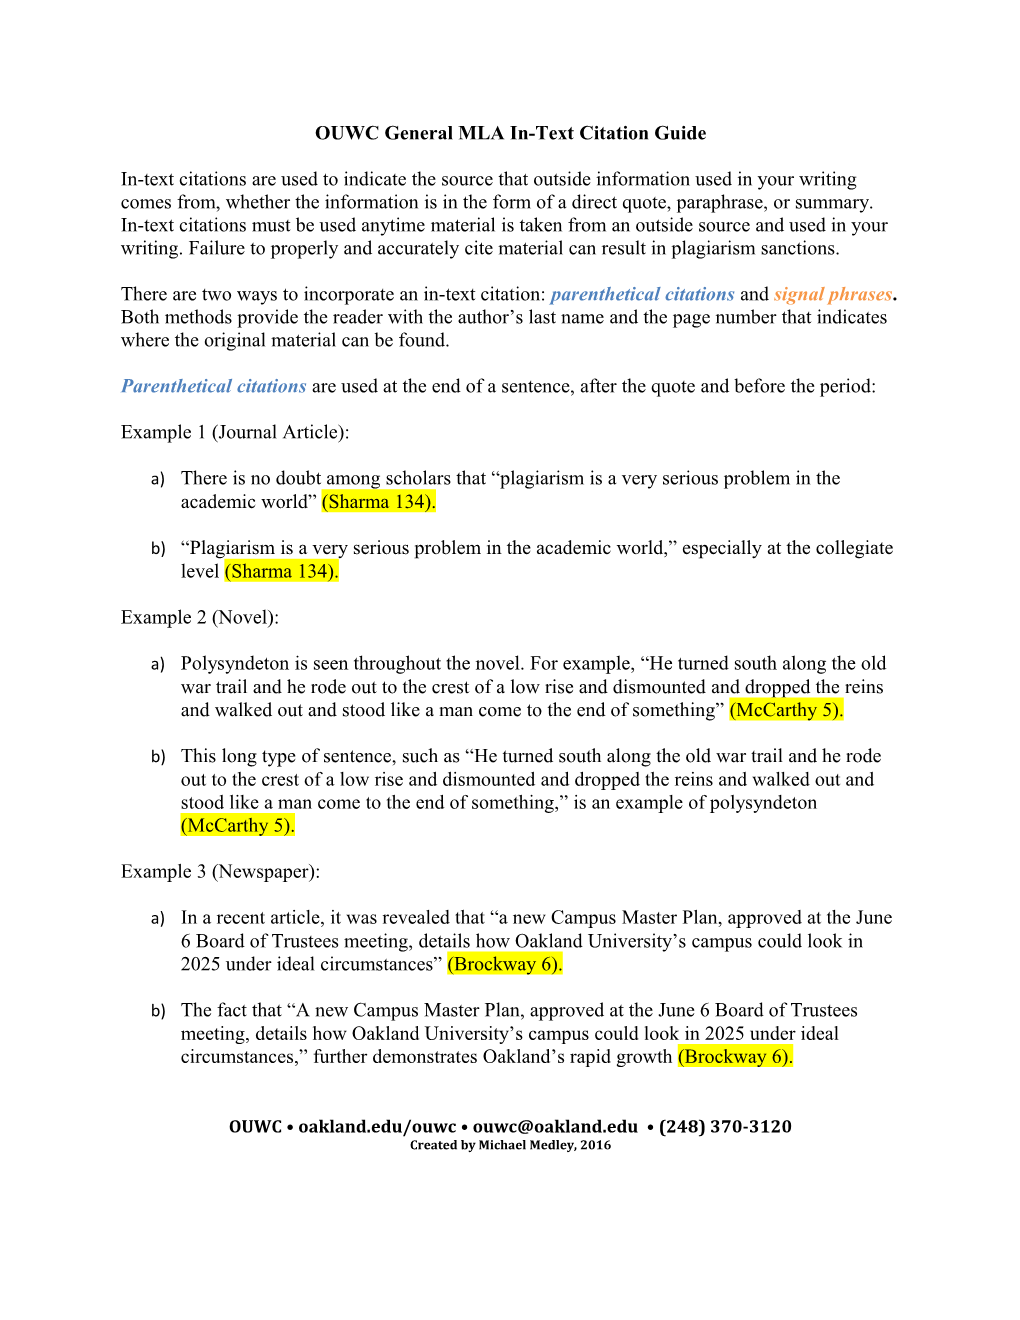 OUWC General MLA In-Text Citation Guide